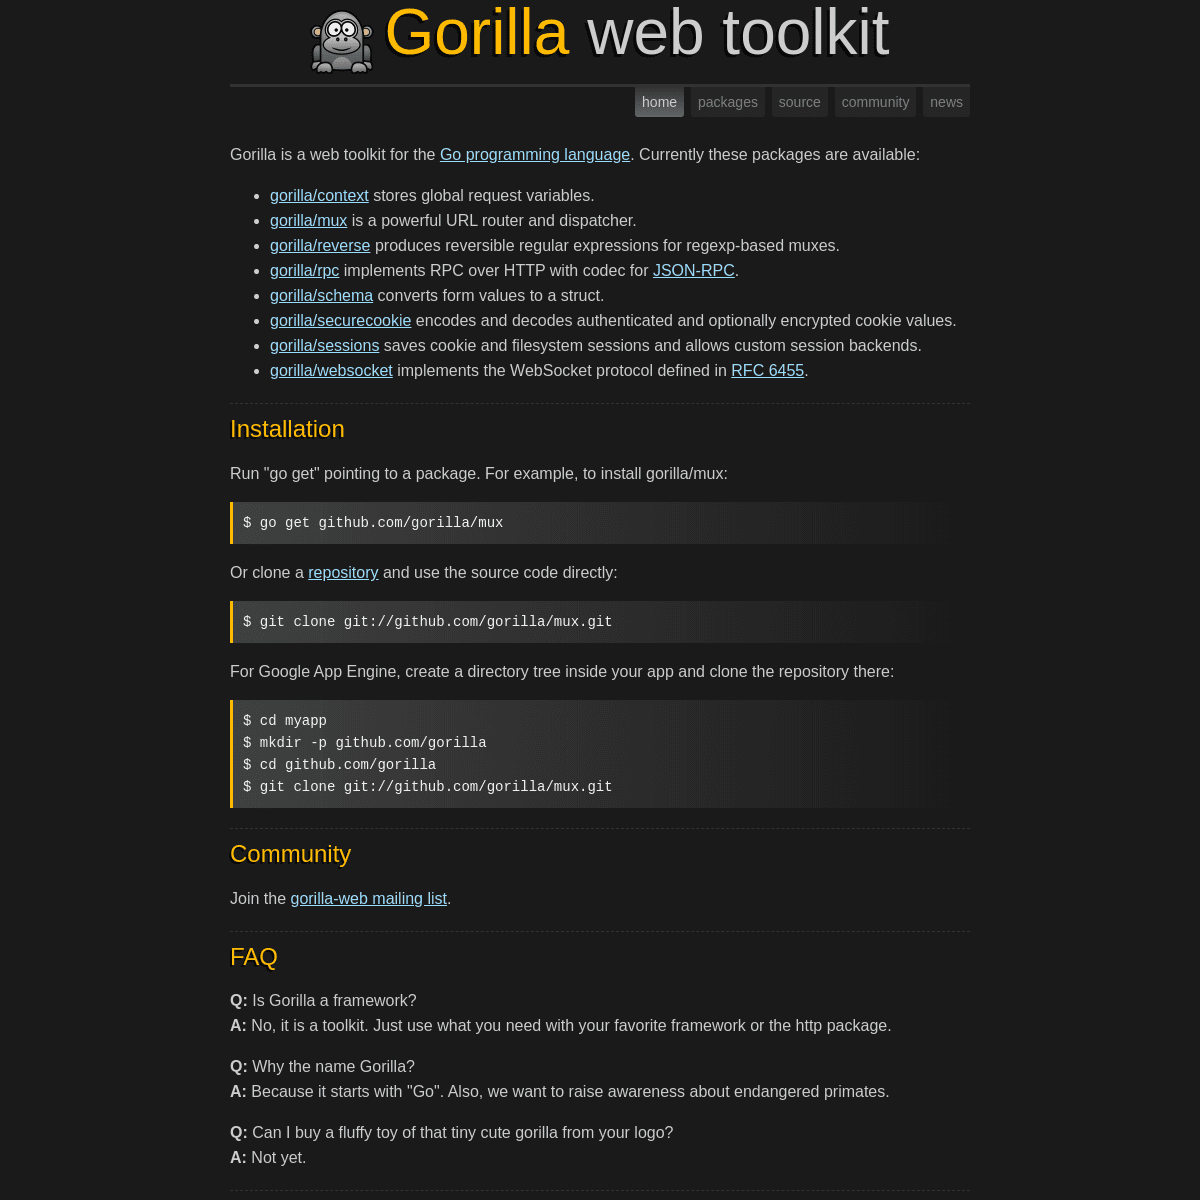 A complete backup of gorillatoolkit.org